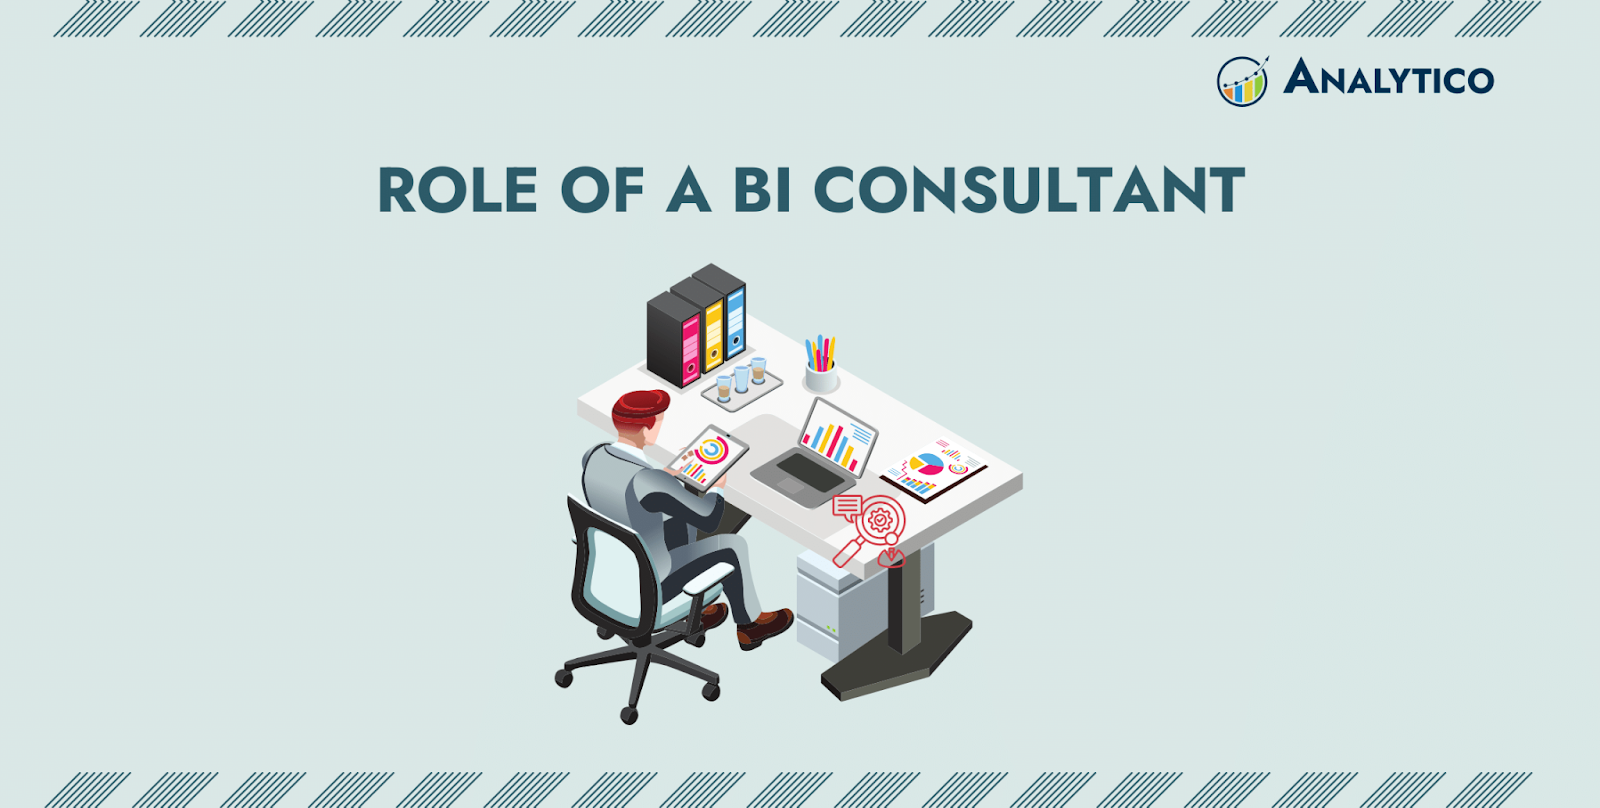 What is the Role of a BI Consultant